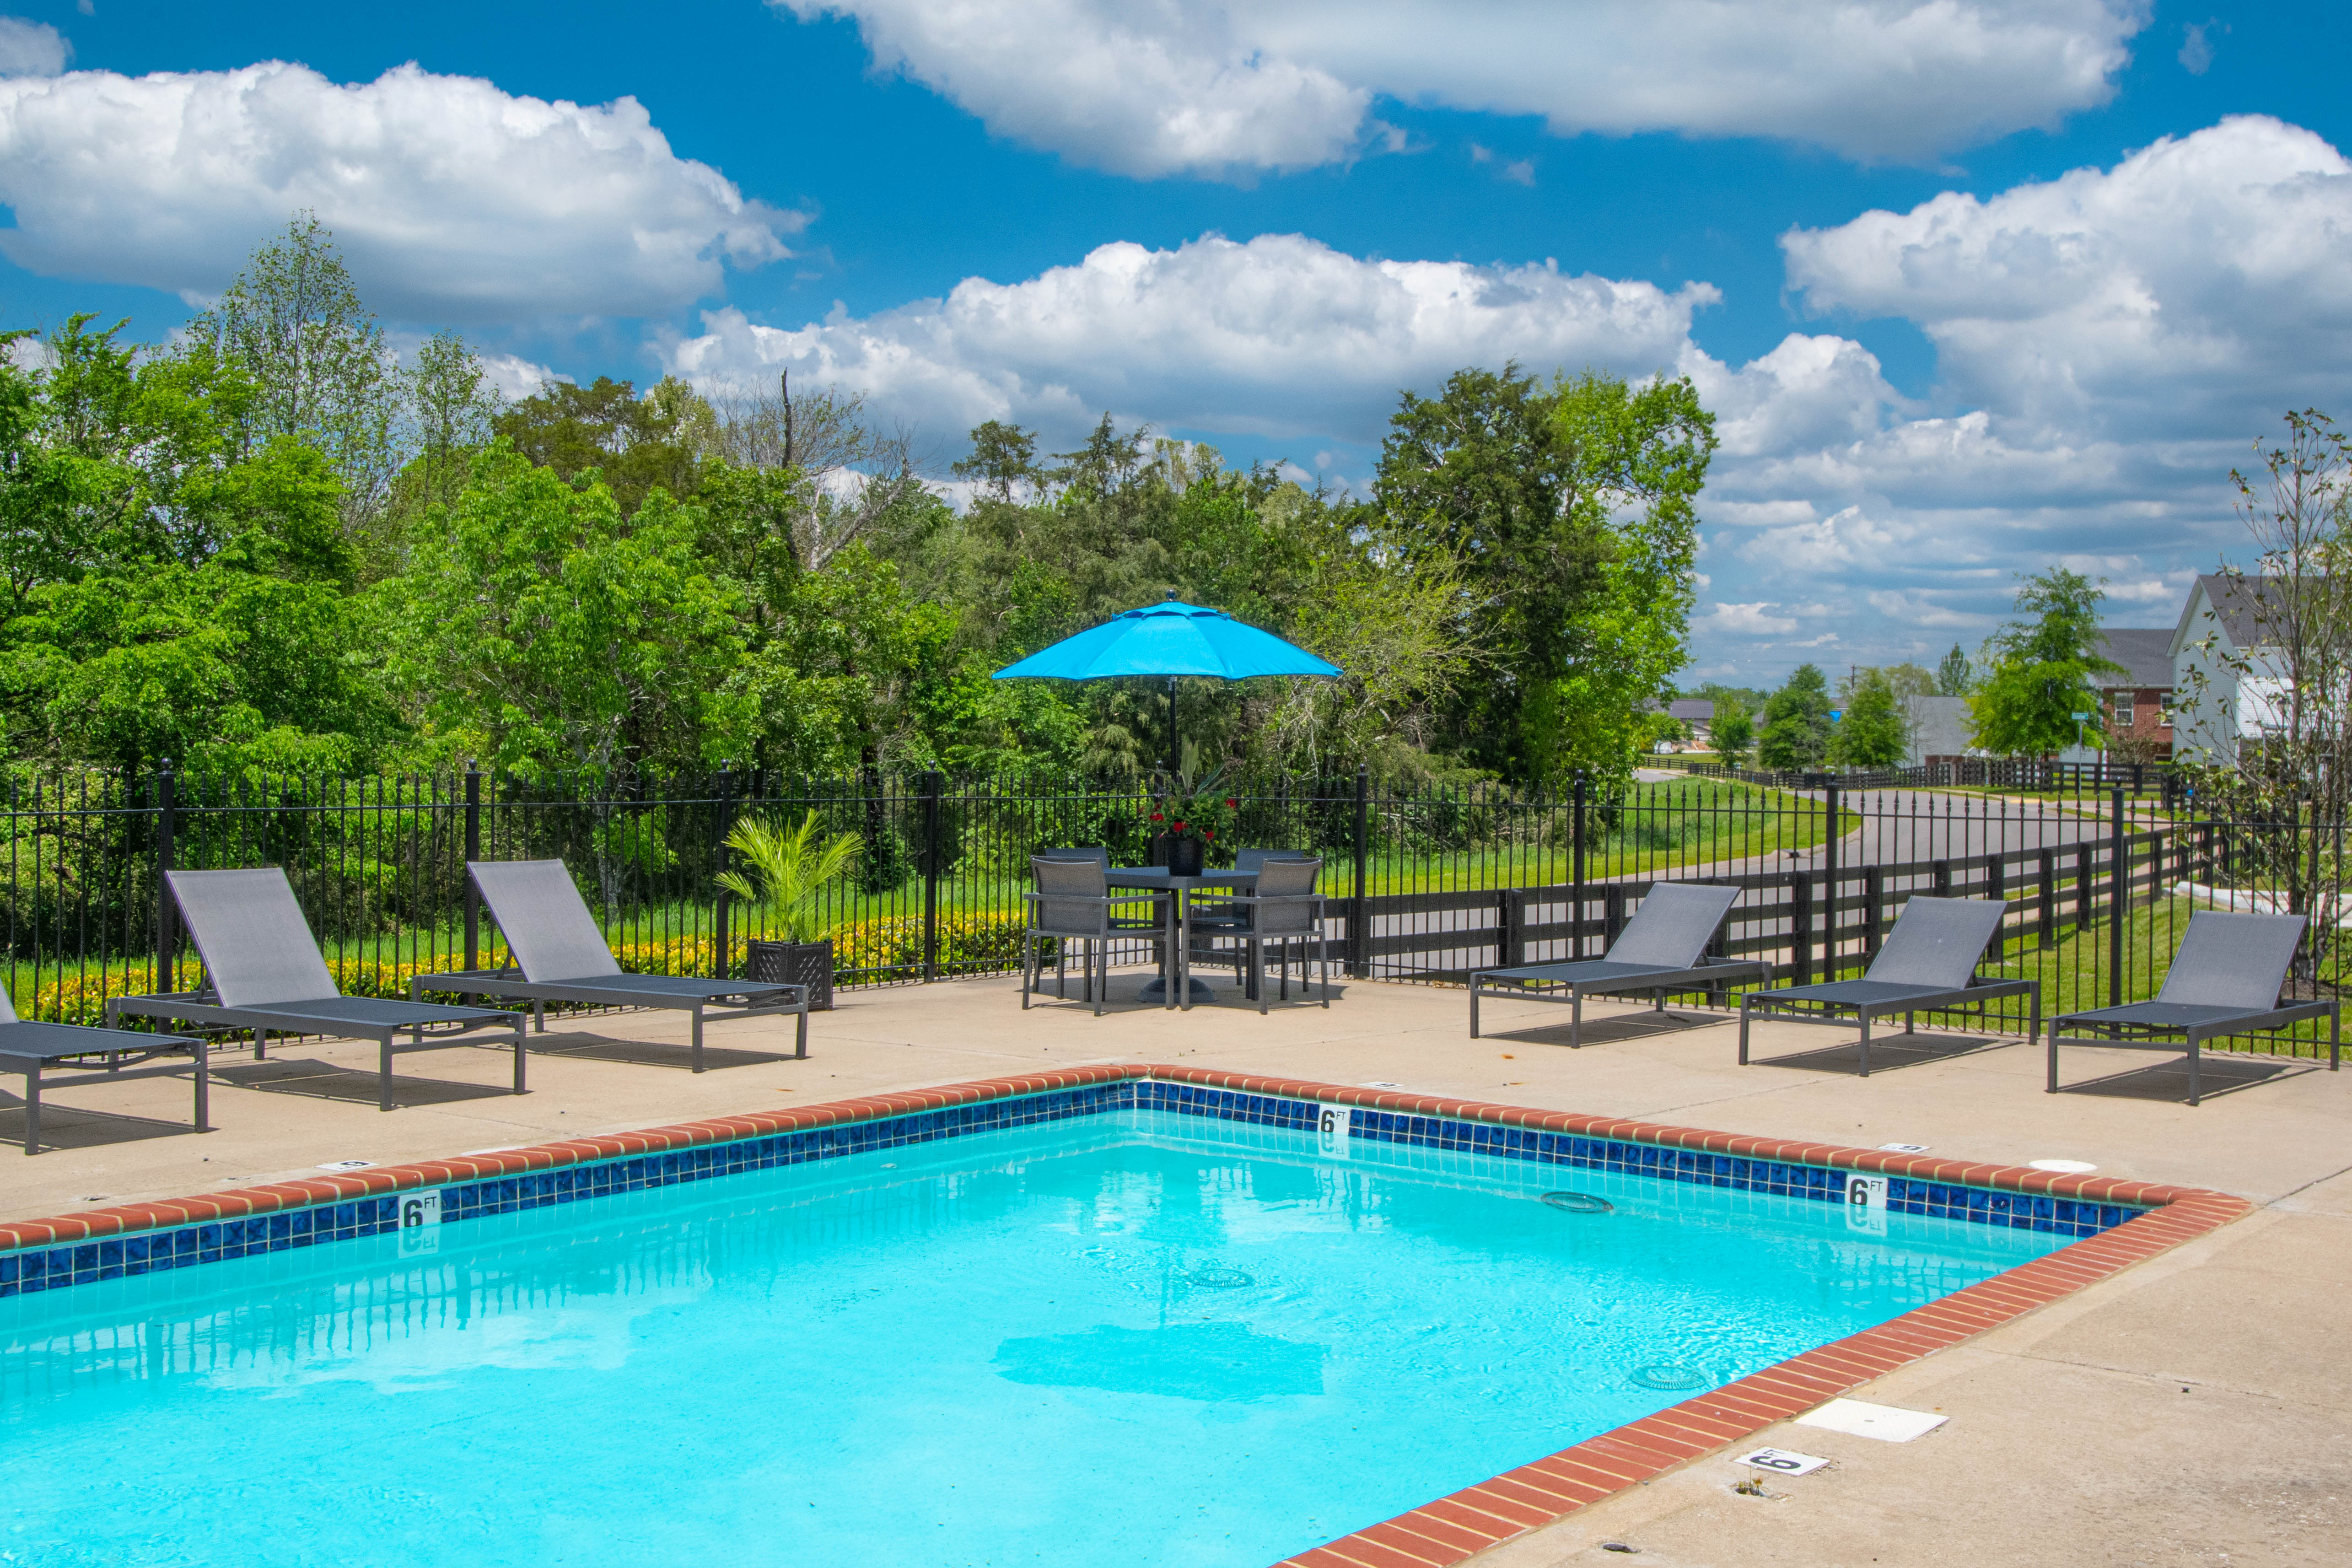 refreshing pool at Chapmans retreat in Spring Hill, Tennessee